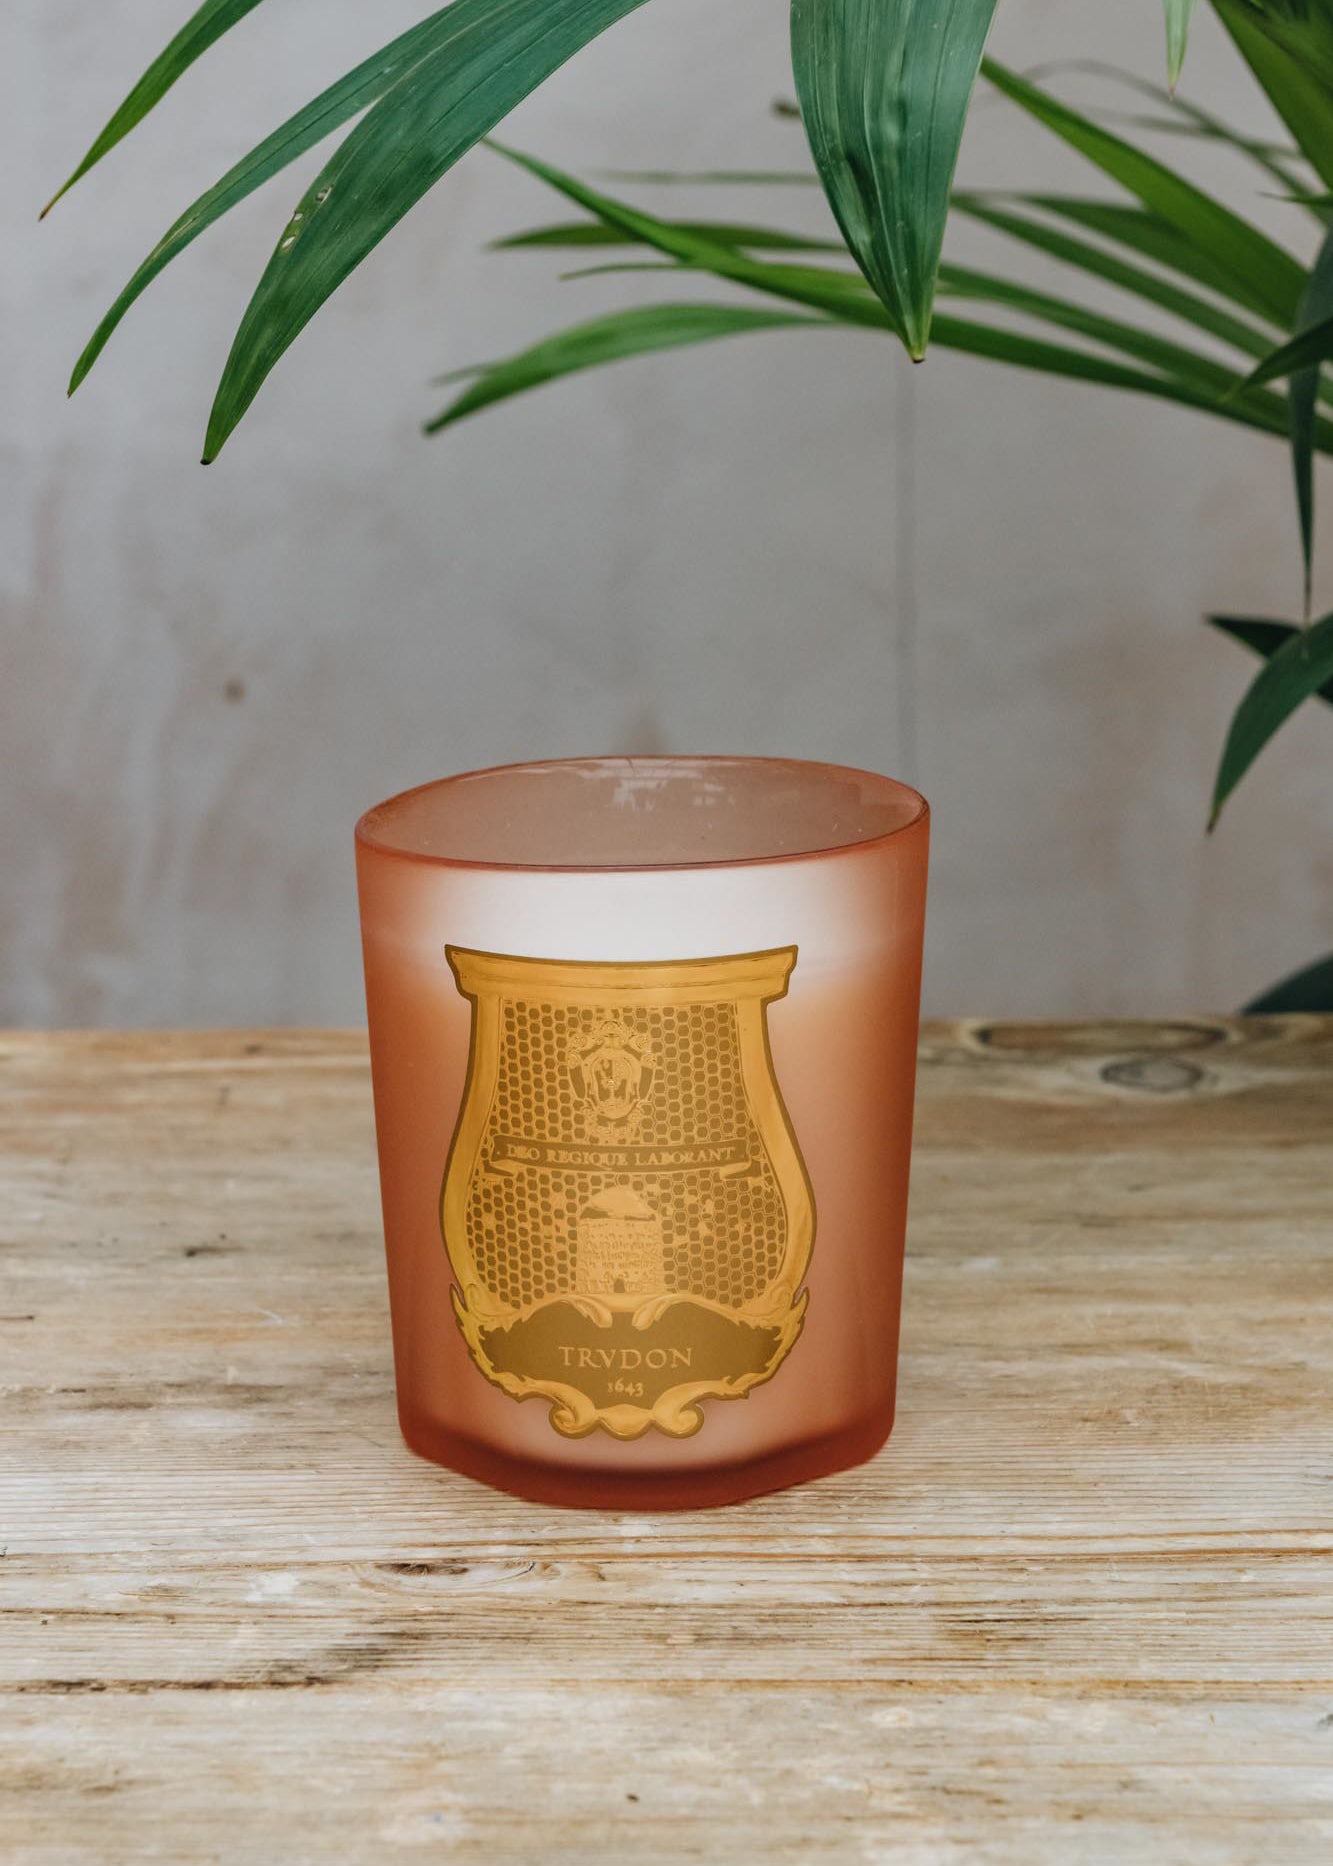 Trudon Classic Candle in Tuileries